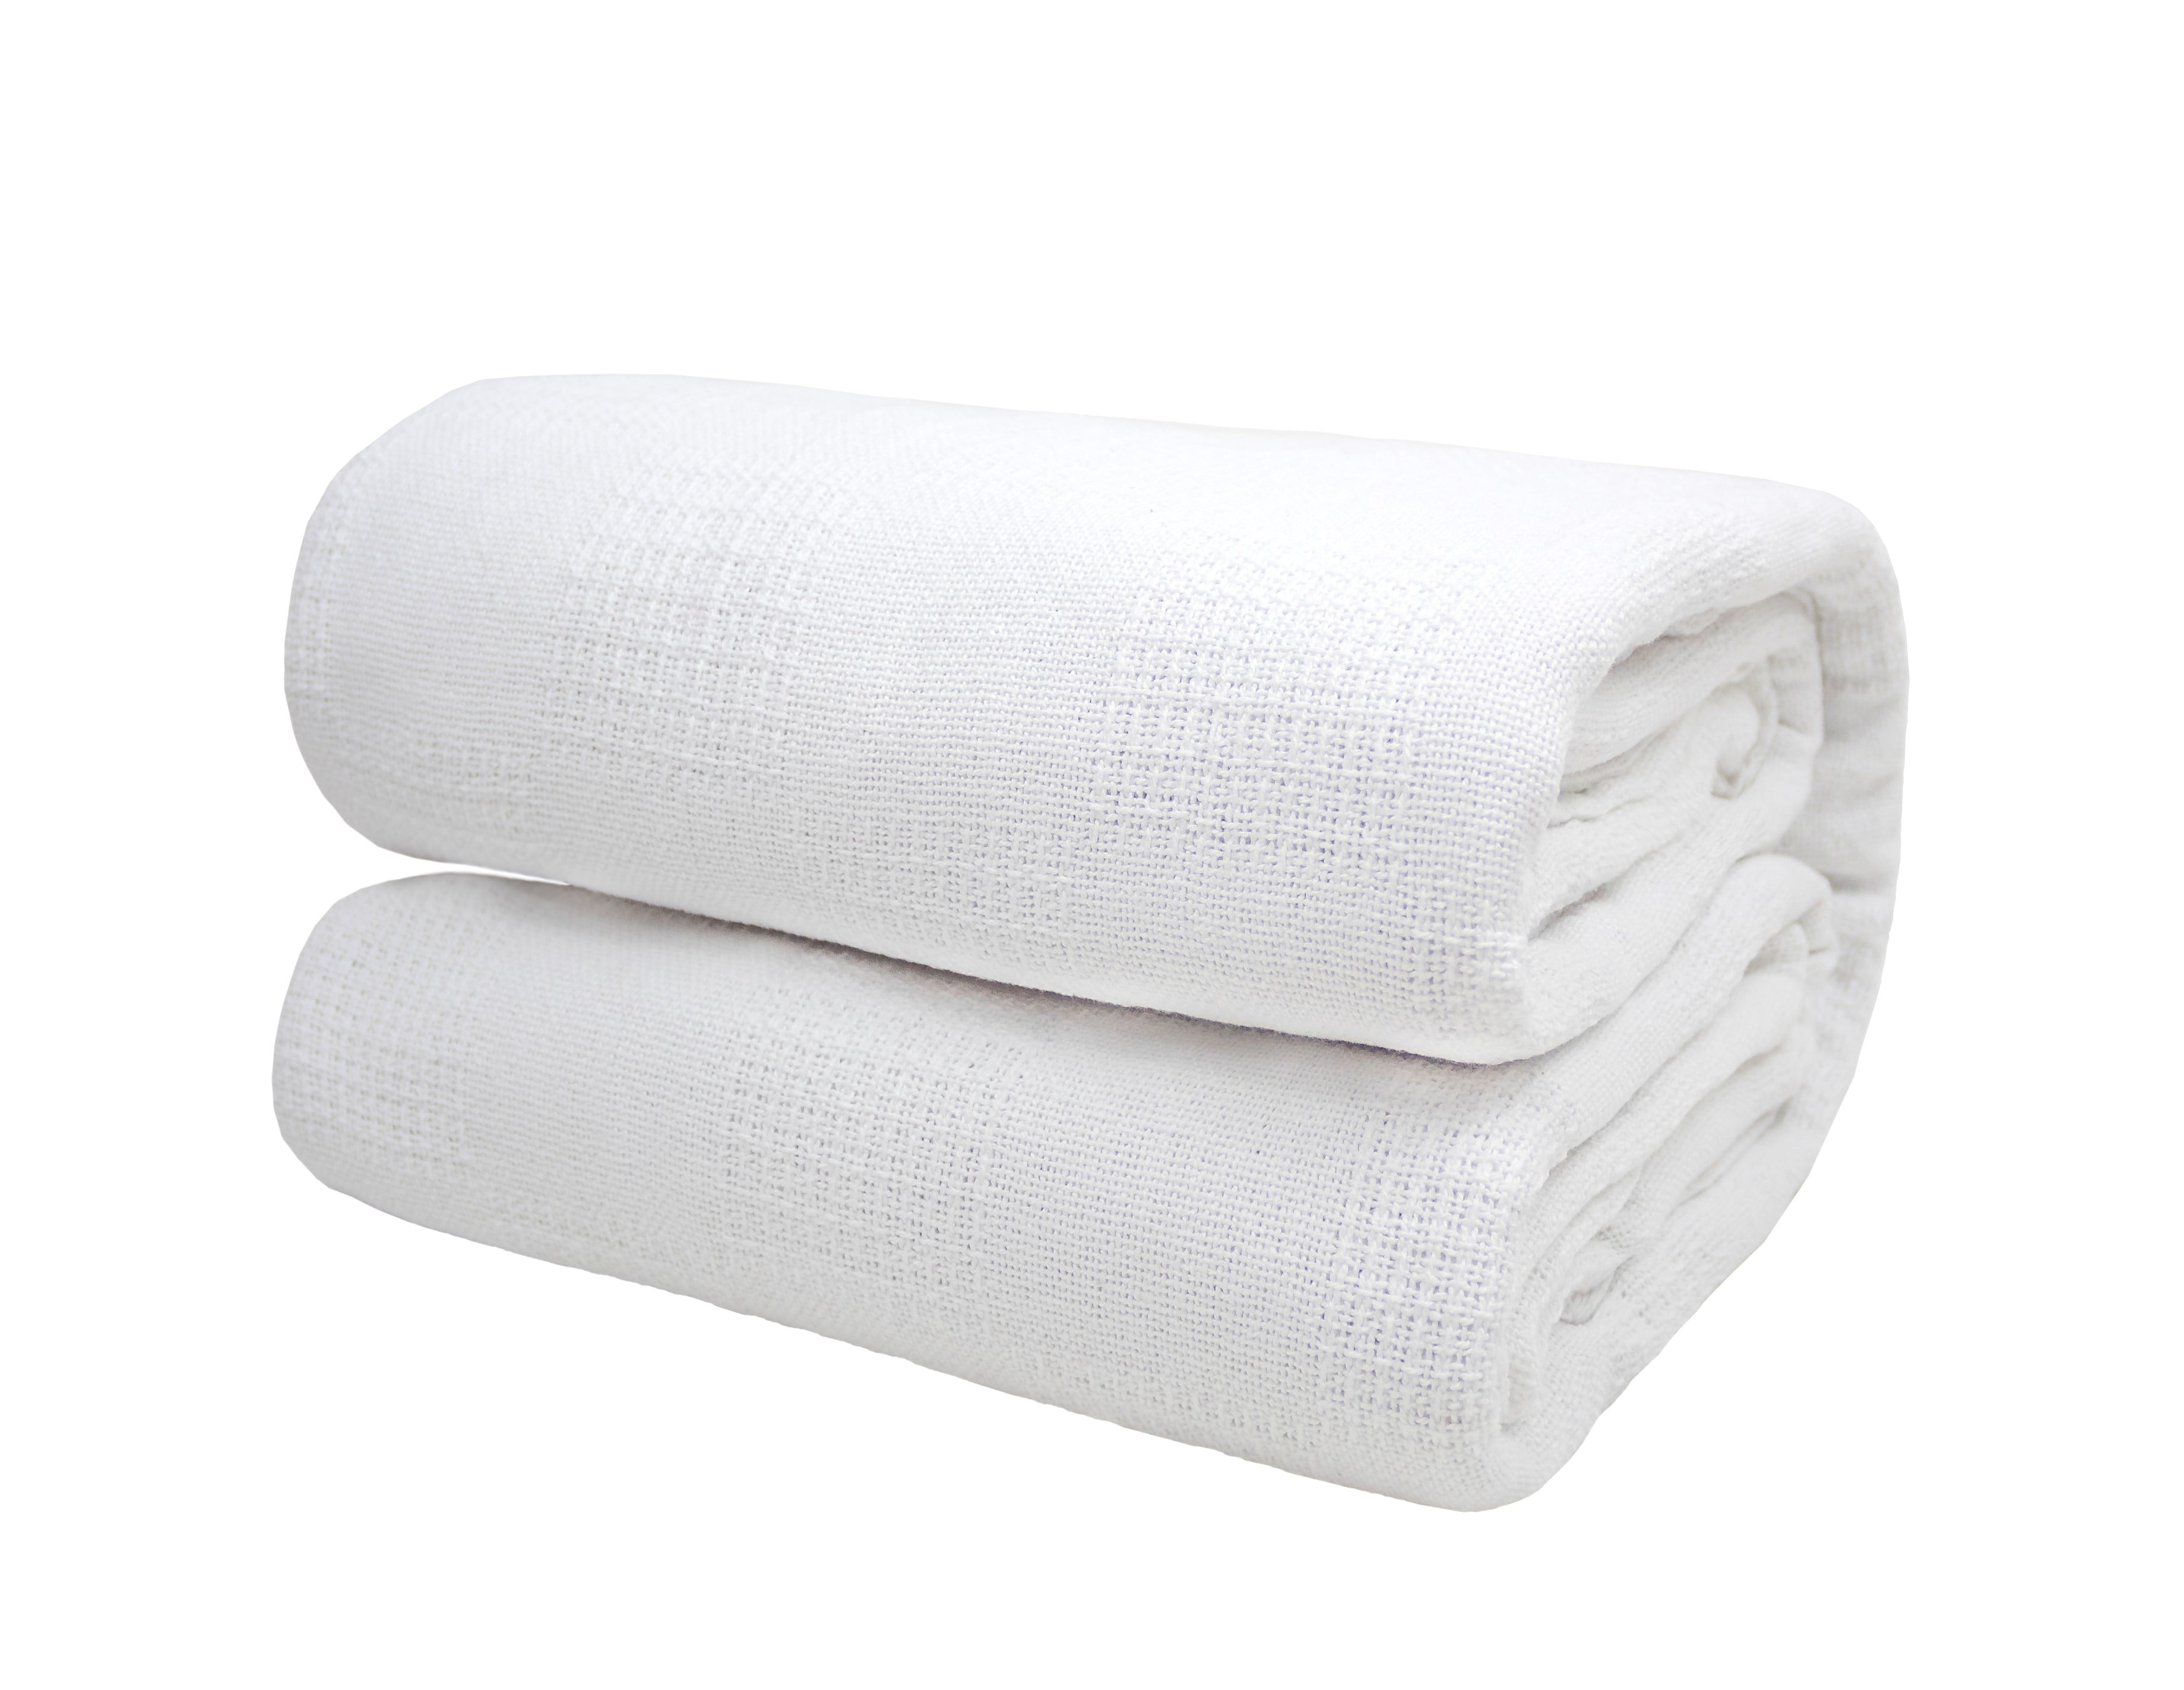 Single White Open Weave Cotton Cellular Blanket Thermal Disinfection Washable 